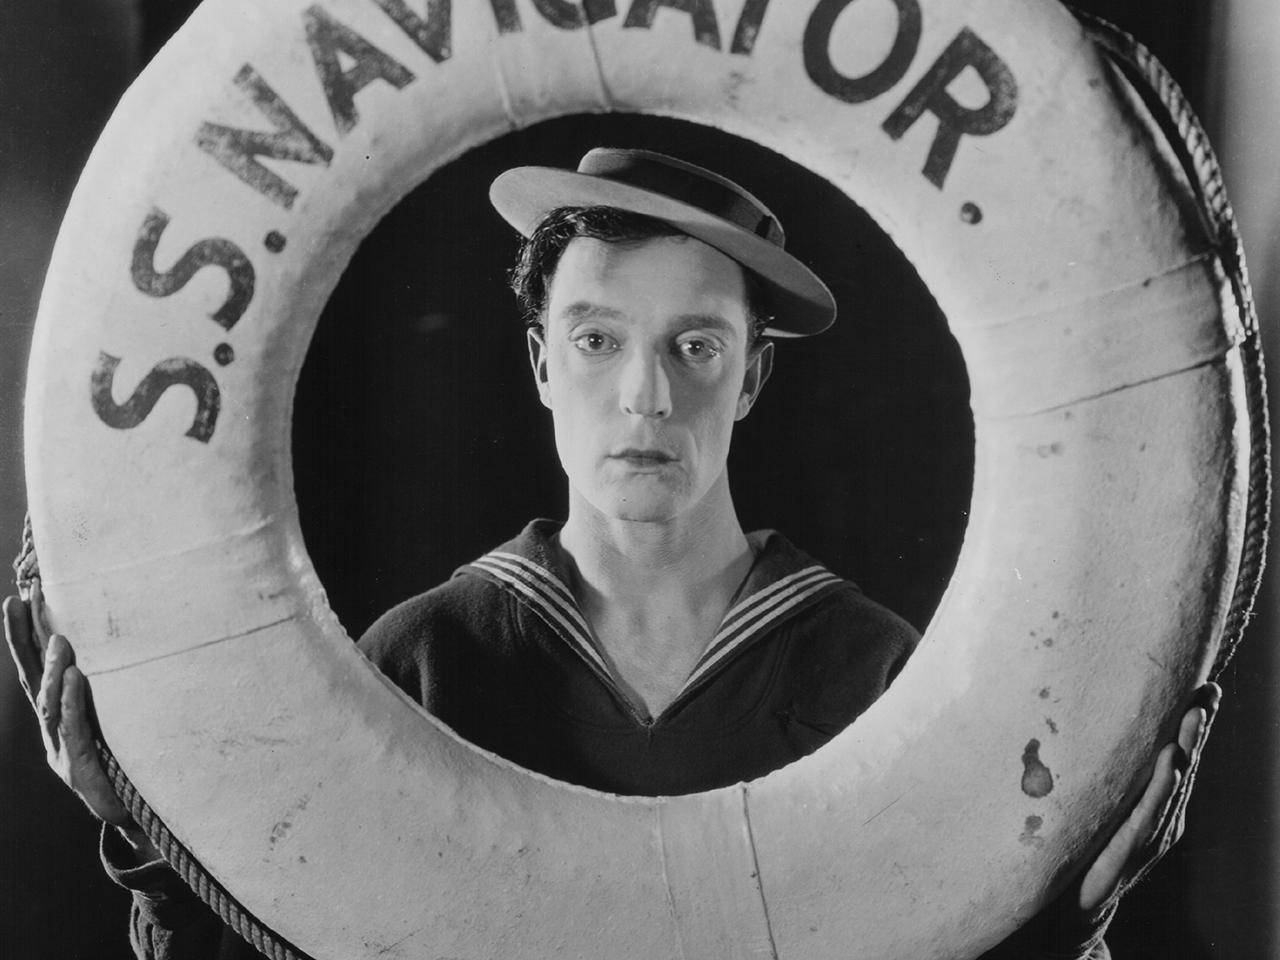 Buster Keaton in a Vintage Sailor Outfit Wallpaper